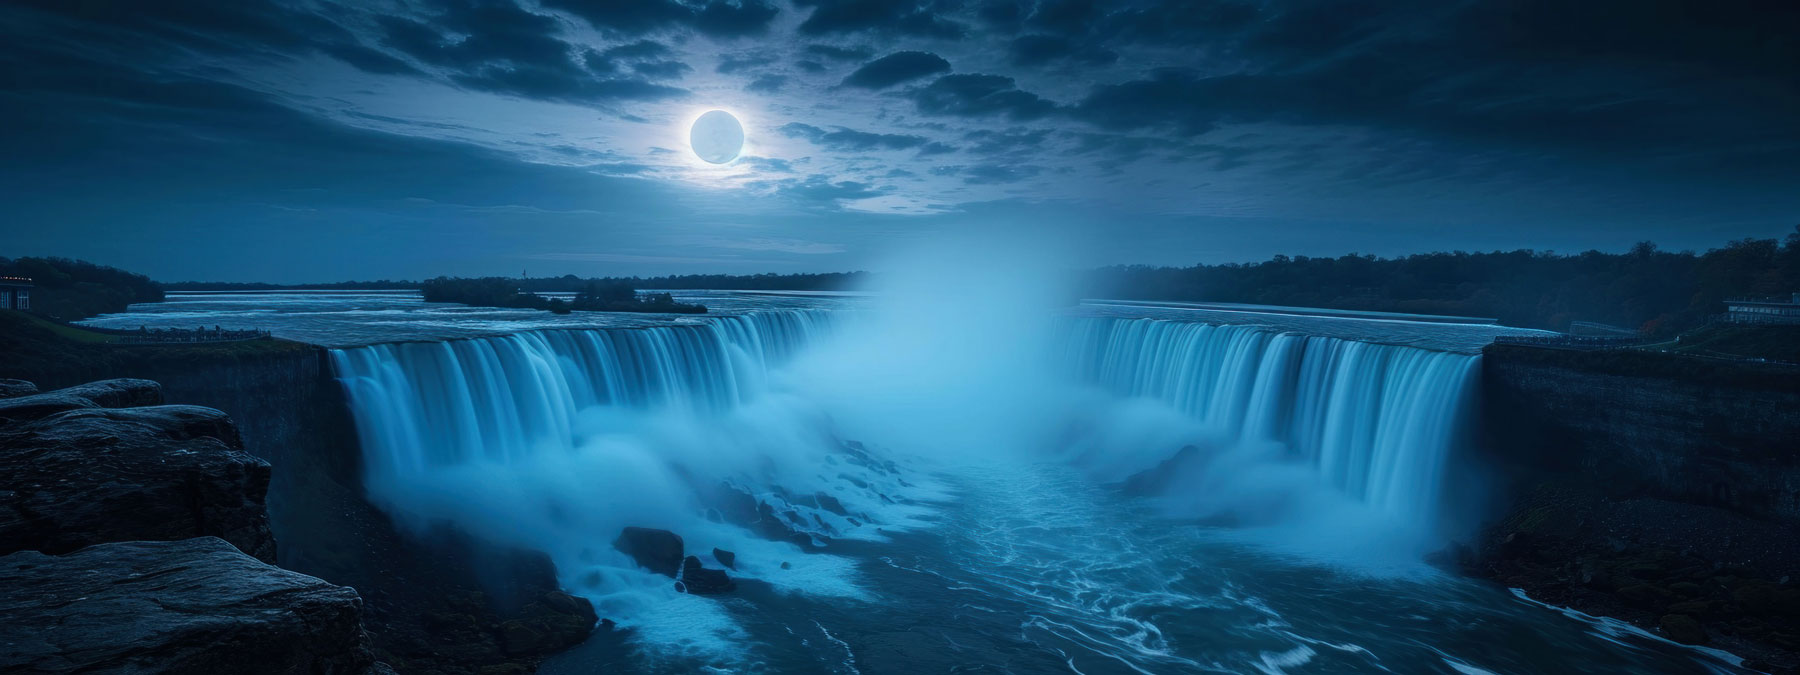 Niagara Falls, Canada, Recognized on National Geographic's 'Best of the